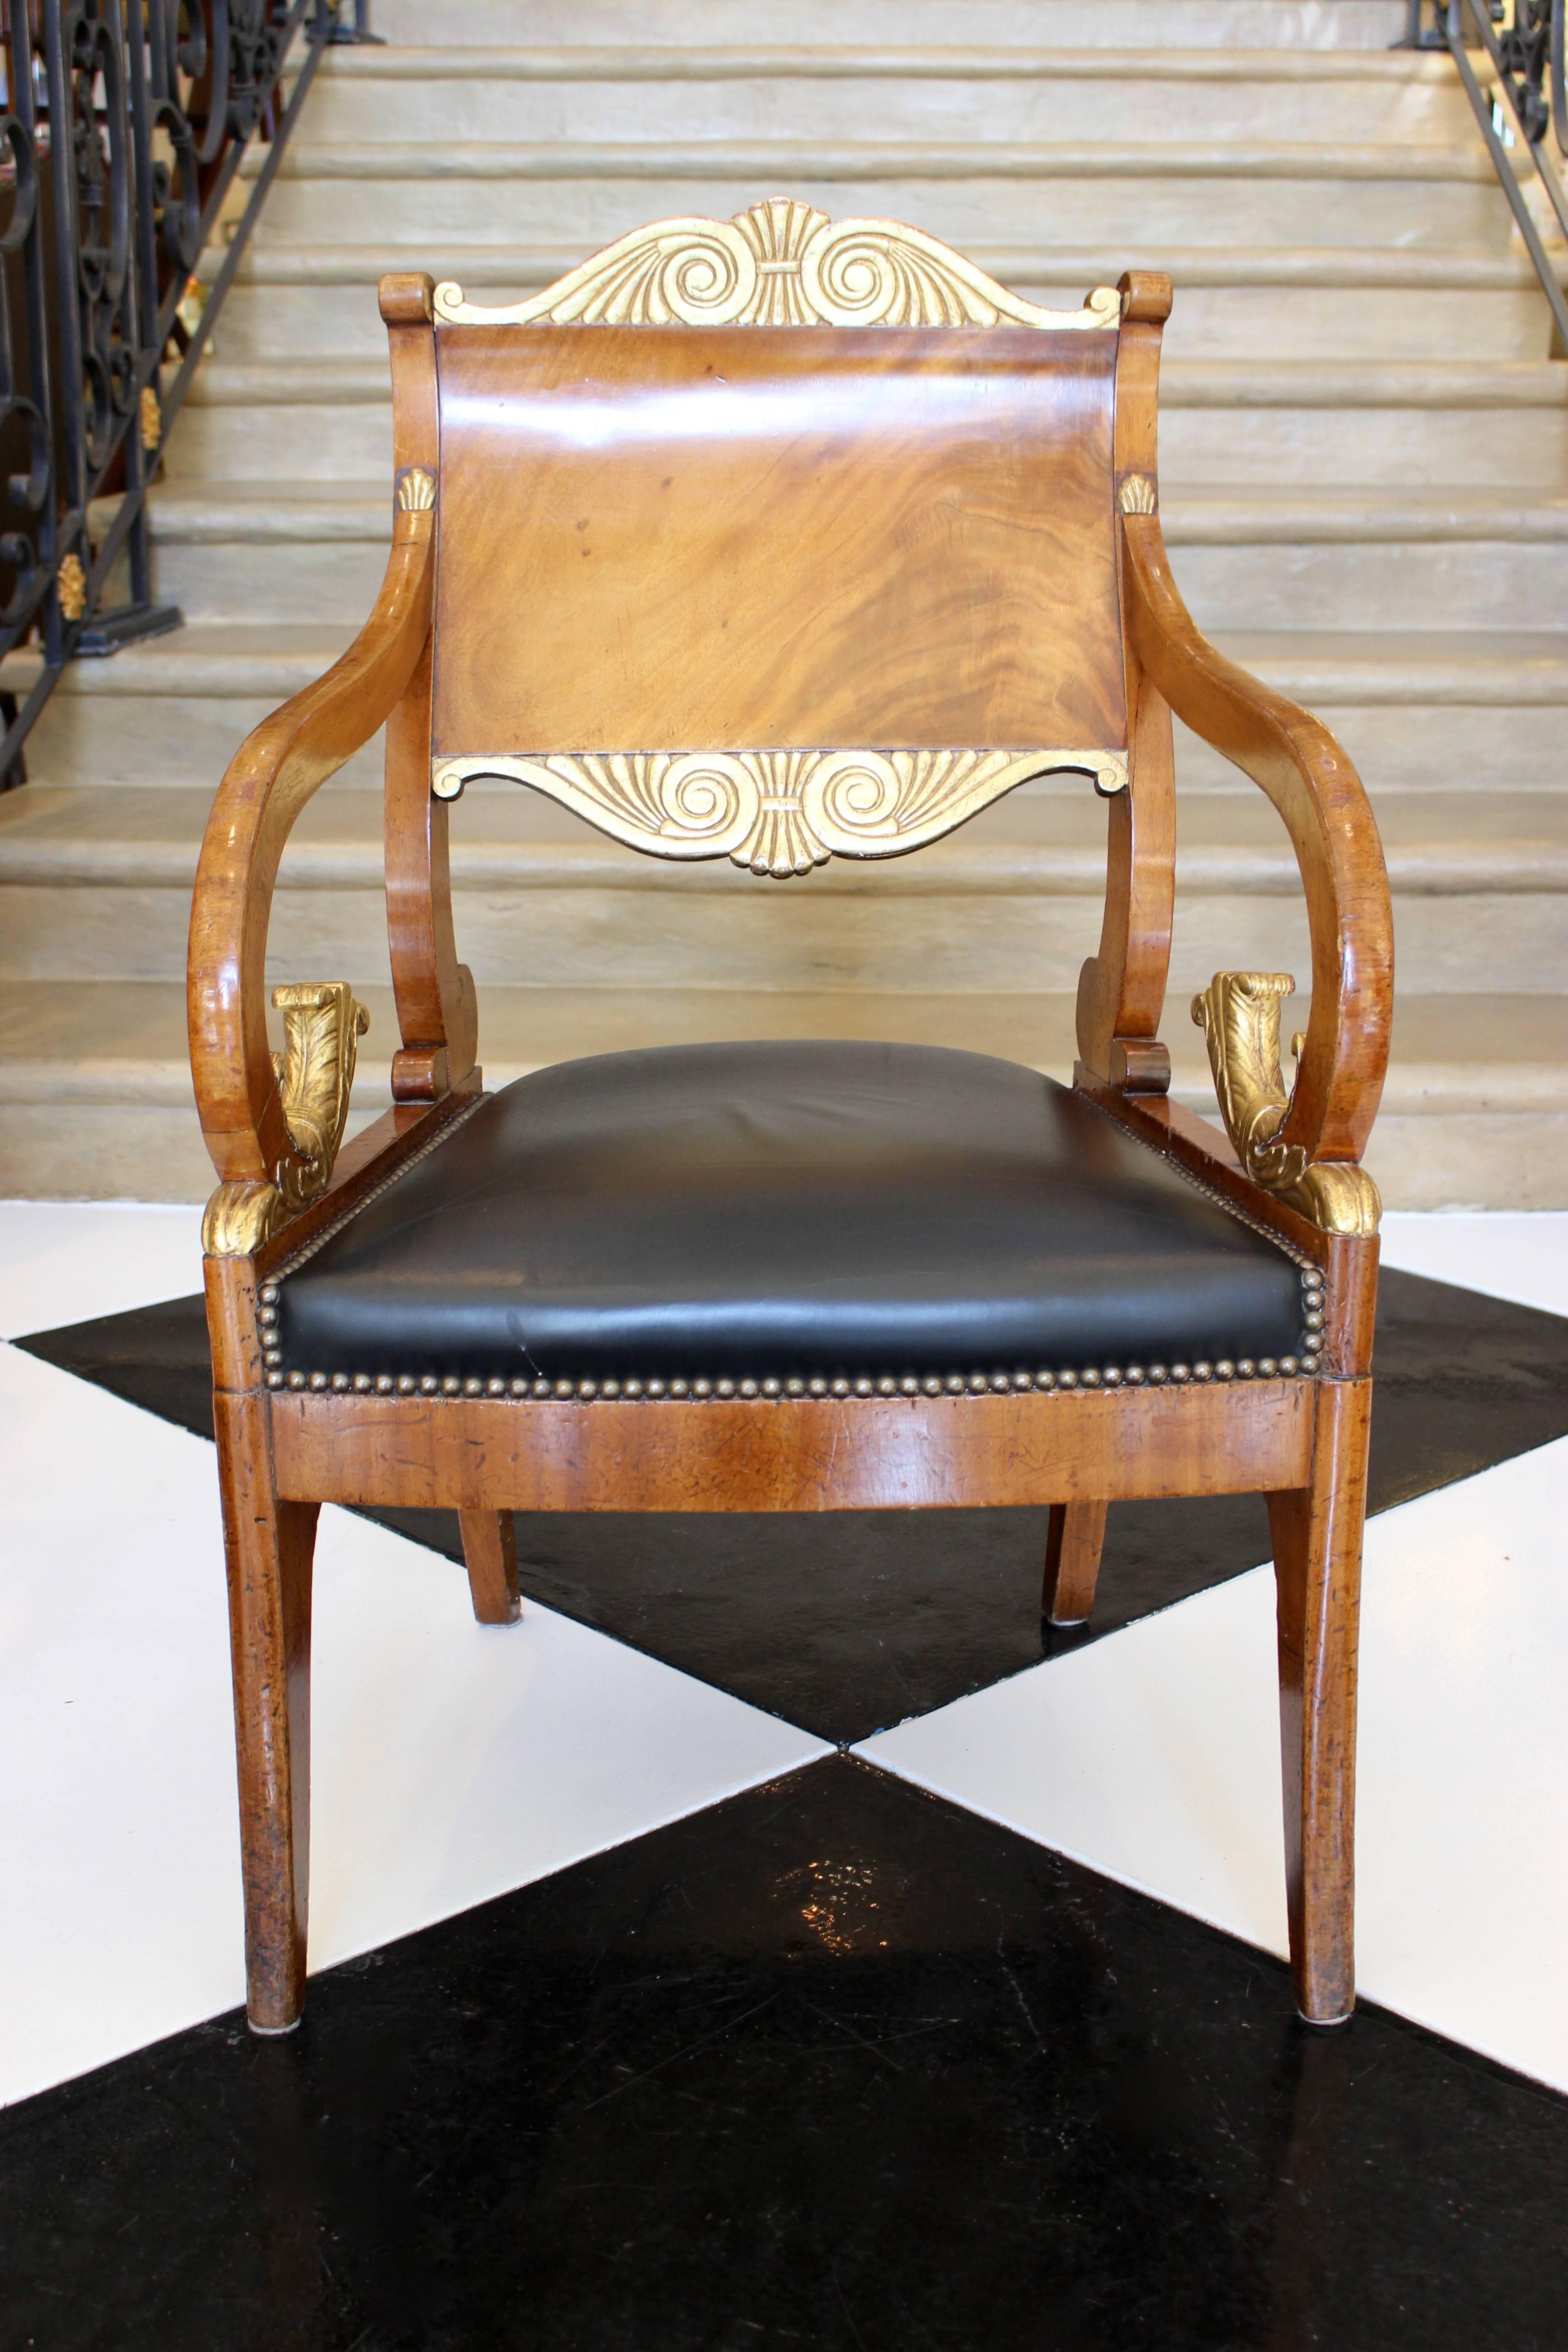 A pair of Russian Neoclassical period mahogany parcel-gilt armchairs from the second half of the 18th century, with palmette motifs, black upholstered seats with nailhead trims and scrolled foliage. Each of this exquisite pair of Russian armchairs